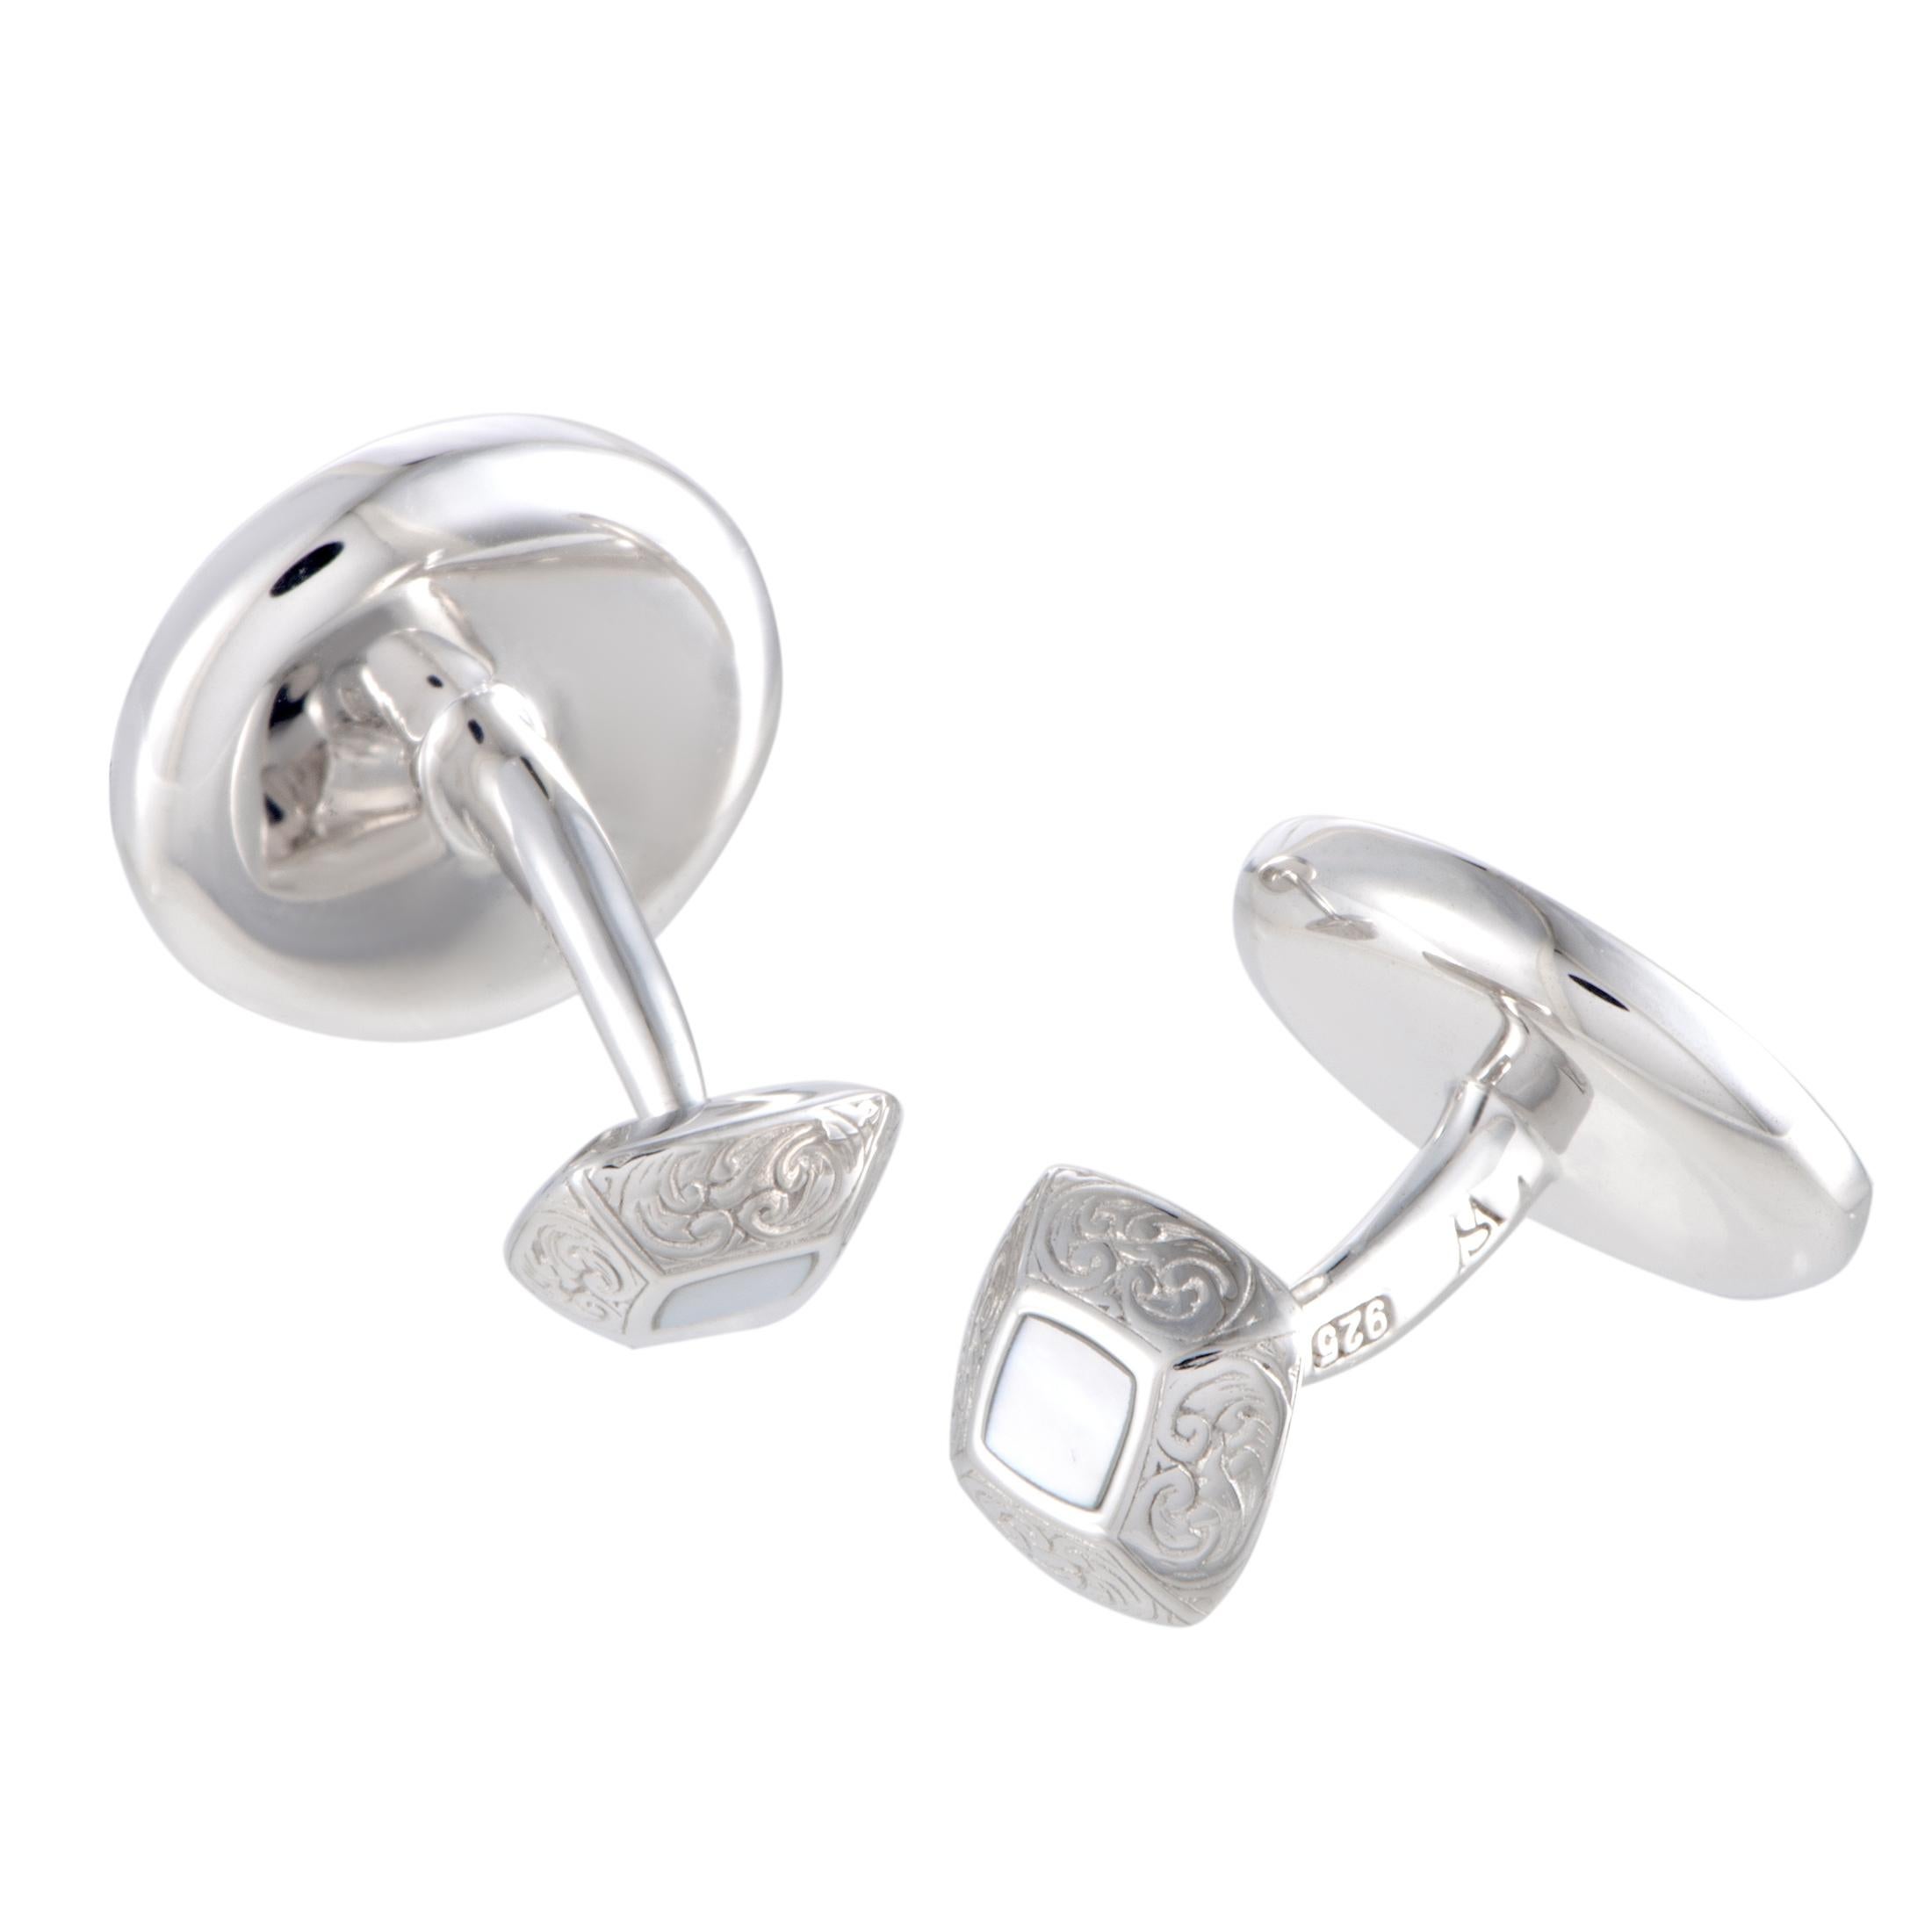 If you are looking for cufflinks that will accentuate your attire in a stylish manner that is, at the same time, compellingly unconventional then this stunning pair is an excellent choice. The cufflinks are creatively designed by Stephen Webster for